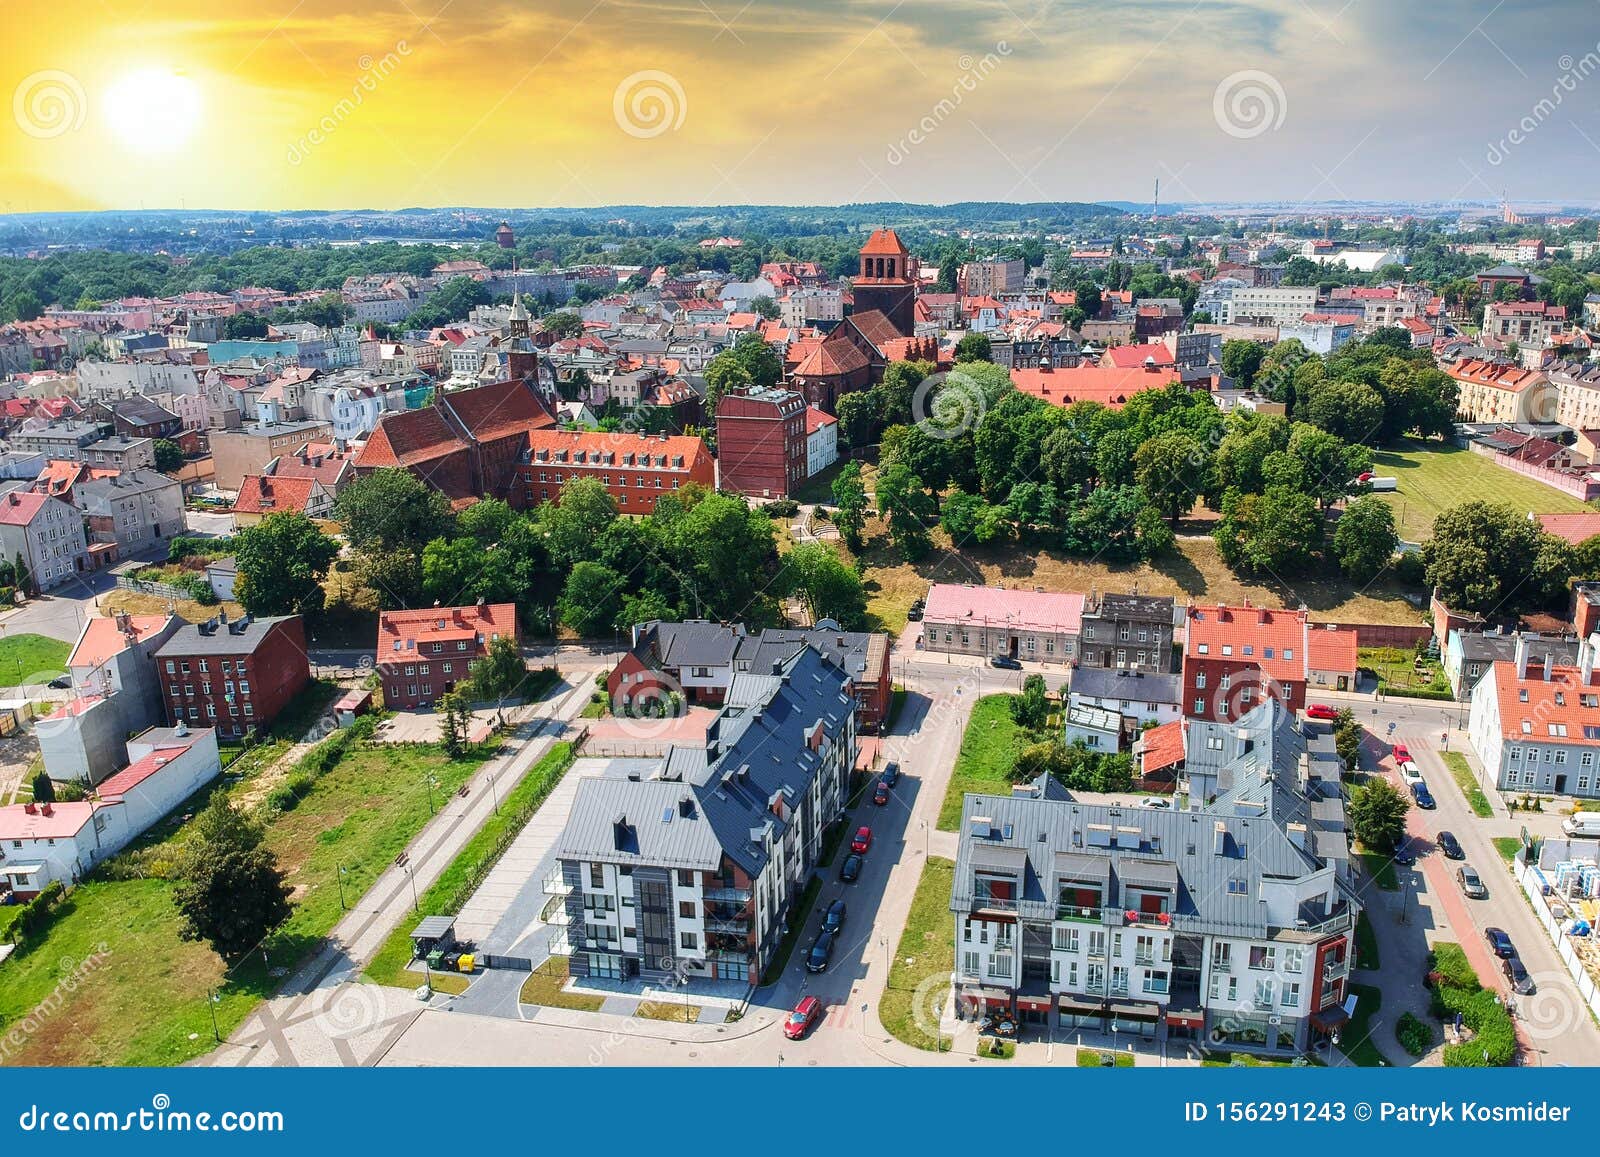 aerial view of tczew city over wisla river in poland